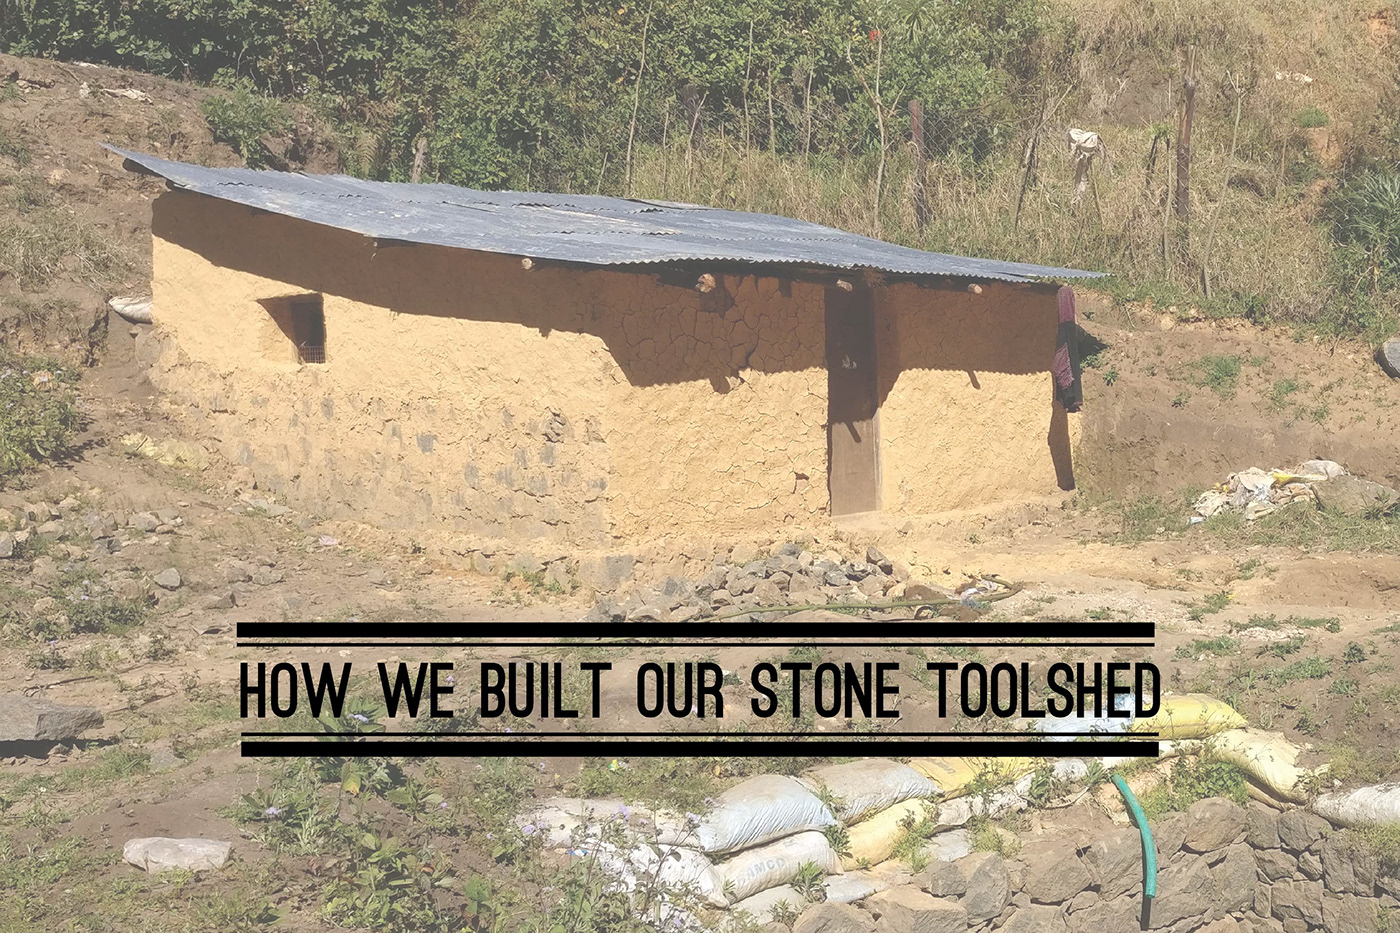 architecture naturalbuilding stonework stone mud Sustainable structures earthdesign Toolshed Handbuilt